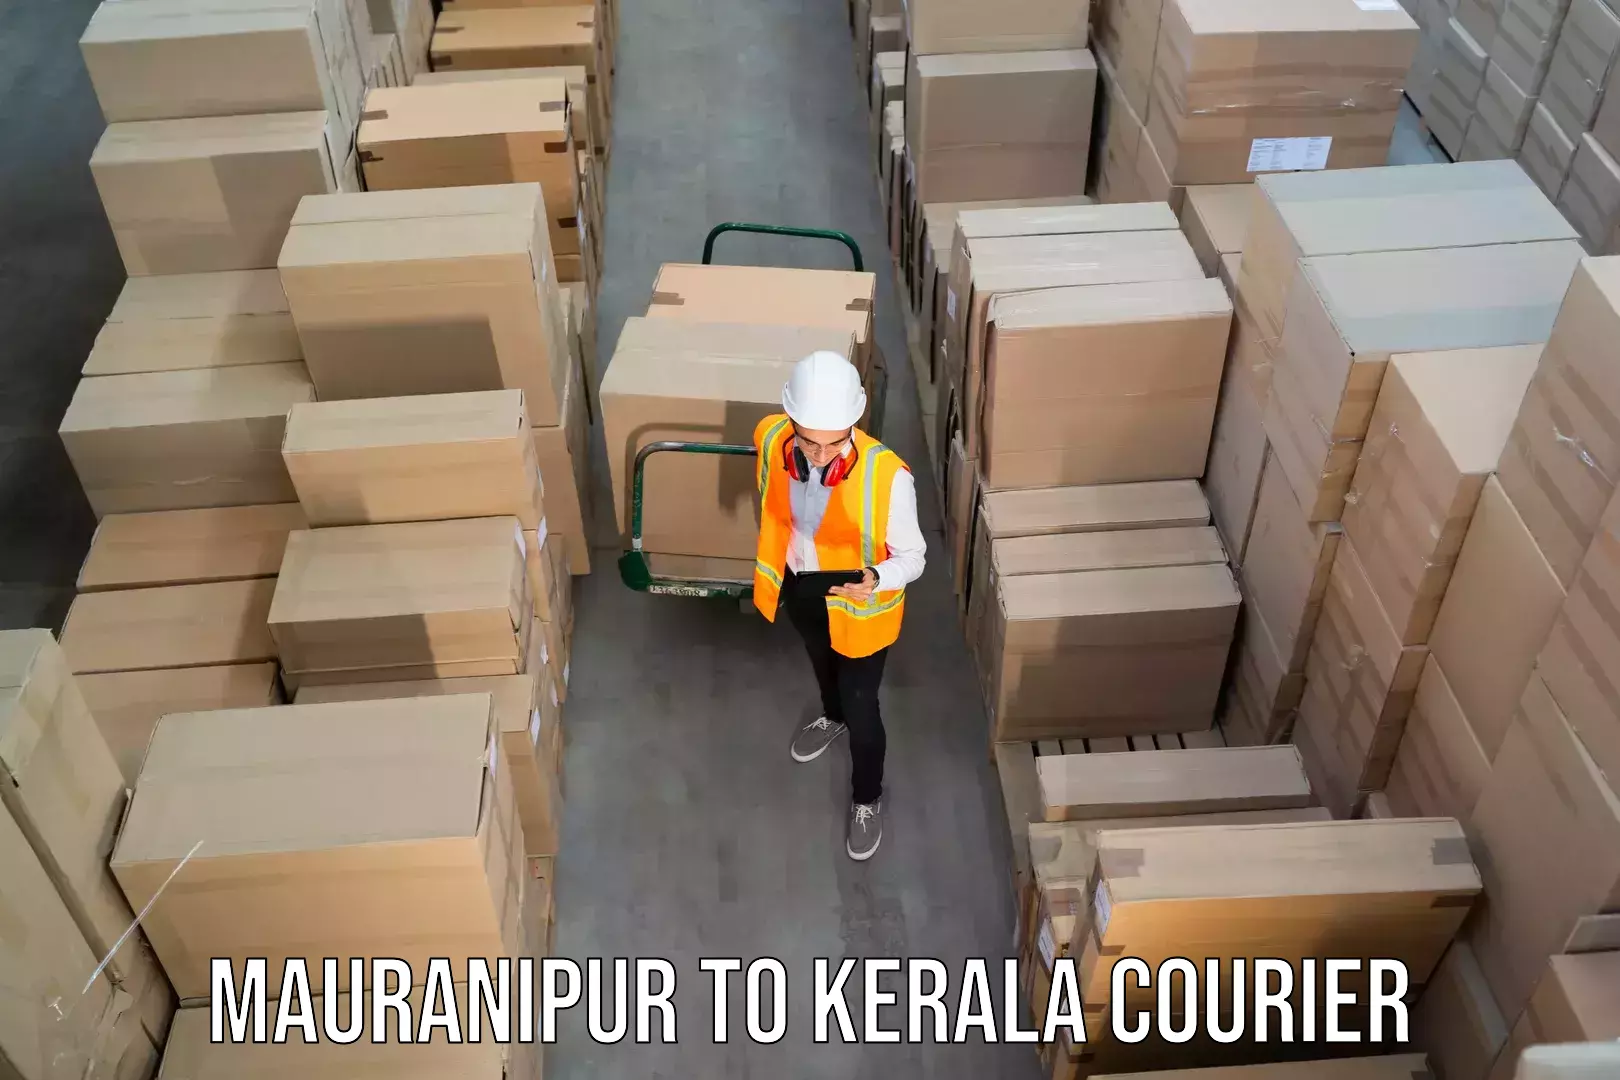 Express delivery capabilities Mauranipur to Piravom